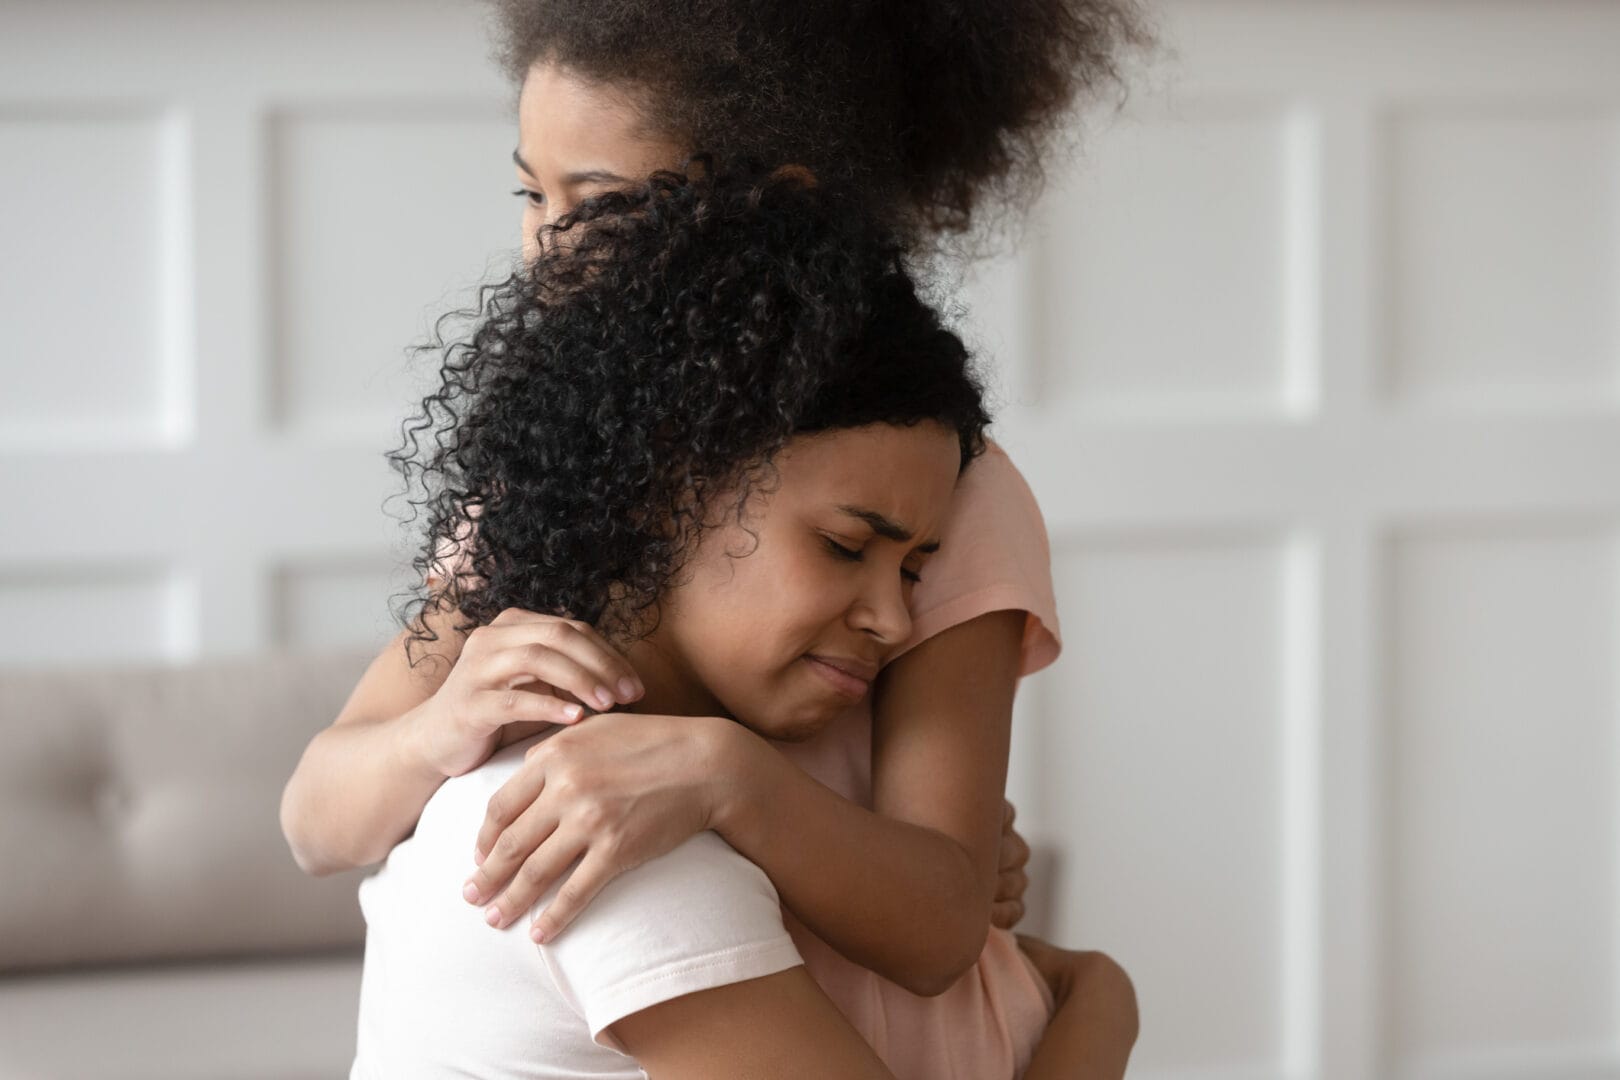 Grieving while parenting: 8 tips for juggling heartbreak, loss and raising children